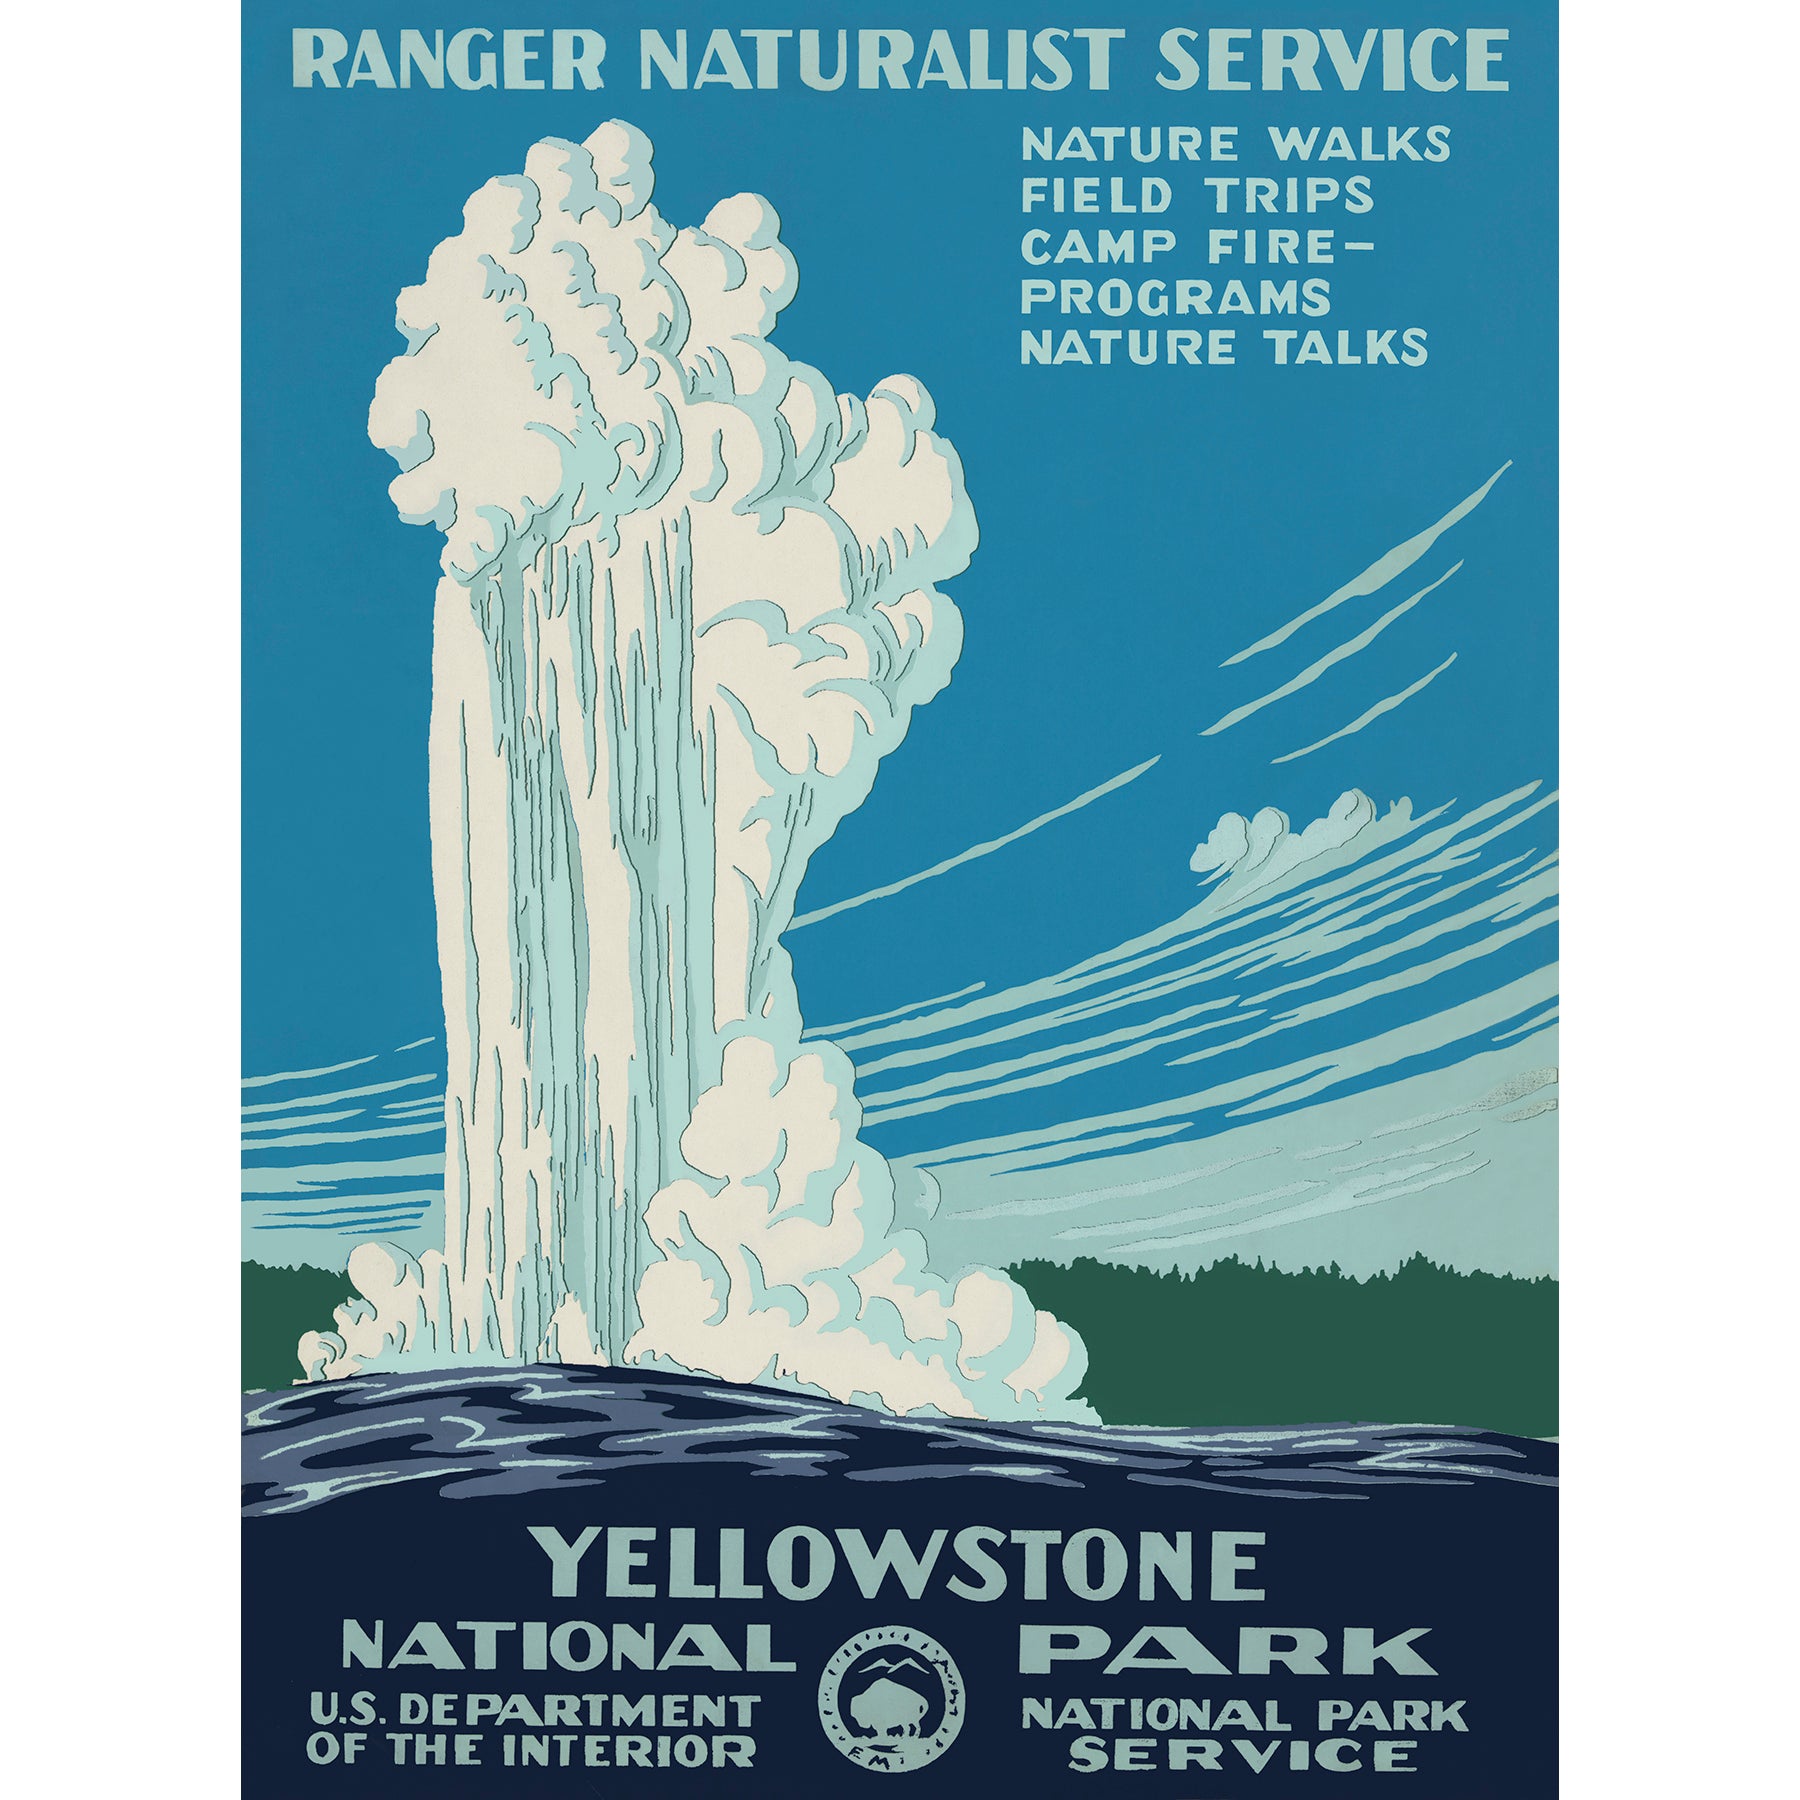 A vintage poster featuring information about Yellowstone National Park